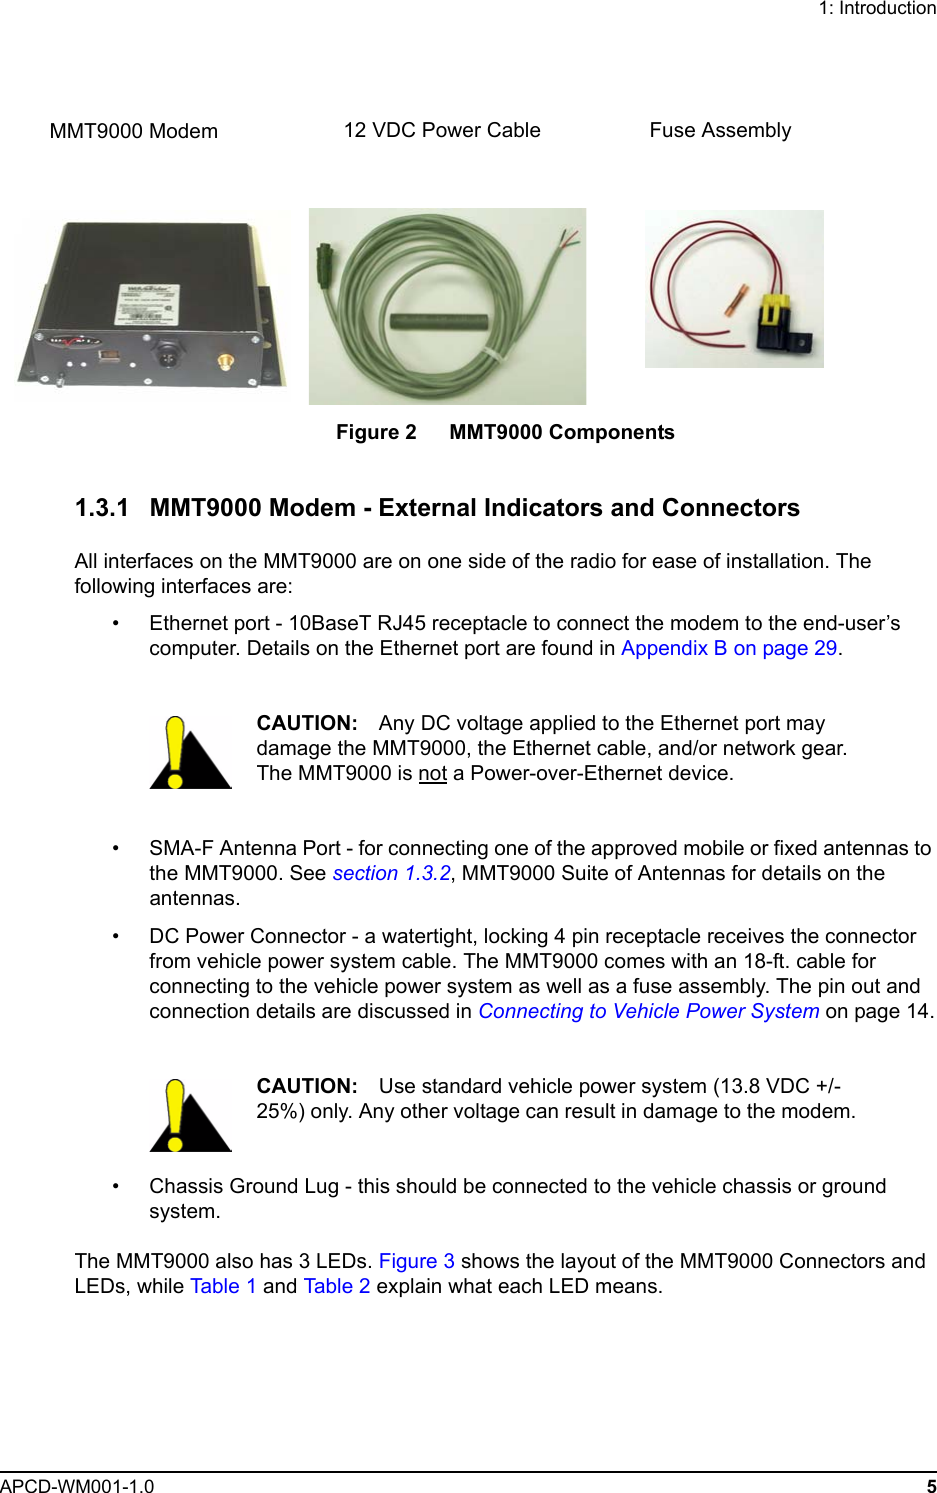 1: IntroductionAPCD-WM001-1.0 5Figure 2   MMT9000 Components1.3.1 MMT9000 Modem - External Indicators and ConnectorsAll interfaces on the MMT9000 are on one side of the radio for ease of installation. The following interfaces are:• Ethernet port - 10BaseT RJ45 receptacle to connect the modem to the end-user’s computer. Details on the Ethernet port are found in Appendix B on page 29.CAUTION: Any DC voltage applied to the Ethernet port may damage the MMT9000, the Ethernet cable, and/or network gear. The MMT9000 is not a Power-over-Ethernet device.• SMA-F Antenna Port - for connecting one of the approved mobile or fixed antennas to the MMT9000. See section 1.3.2, MMT9000 Suite of Antennas for details on the antennas.• DC Power Connector - a watertight, locking 4 pin receptacle receives the connector from vehicle power system cable. The MMT9000 comes with an 18-ft. cable for connecting to the vehicle power system as well as a fuse assembly. The pin out and connection details are discussed in Connecting to Vehicle Power System on page 14.CAUTION: Use standard vehicle power system (13.8 VDC +/- 25%) only. Any other voltage can result in damage to the modem. • Chassis Ground Lug - this should be connected to the vehicle chassis or ground system.The MMT9000 also has 3 LEDs. Figure 3 shows the layout of the MMT9000 Connectors and LEDs, while Table 1 and Table 2 explain what each LED means.MMT9000 Modem Fuse Assembly12 VDC Power Cable